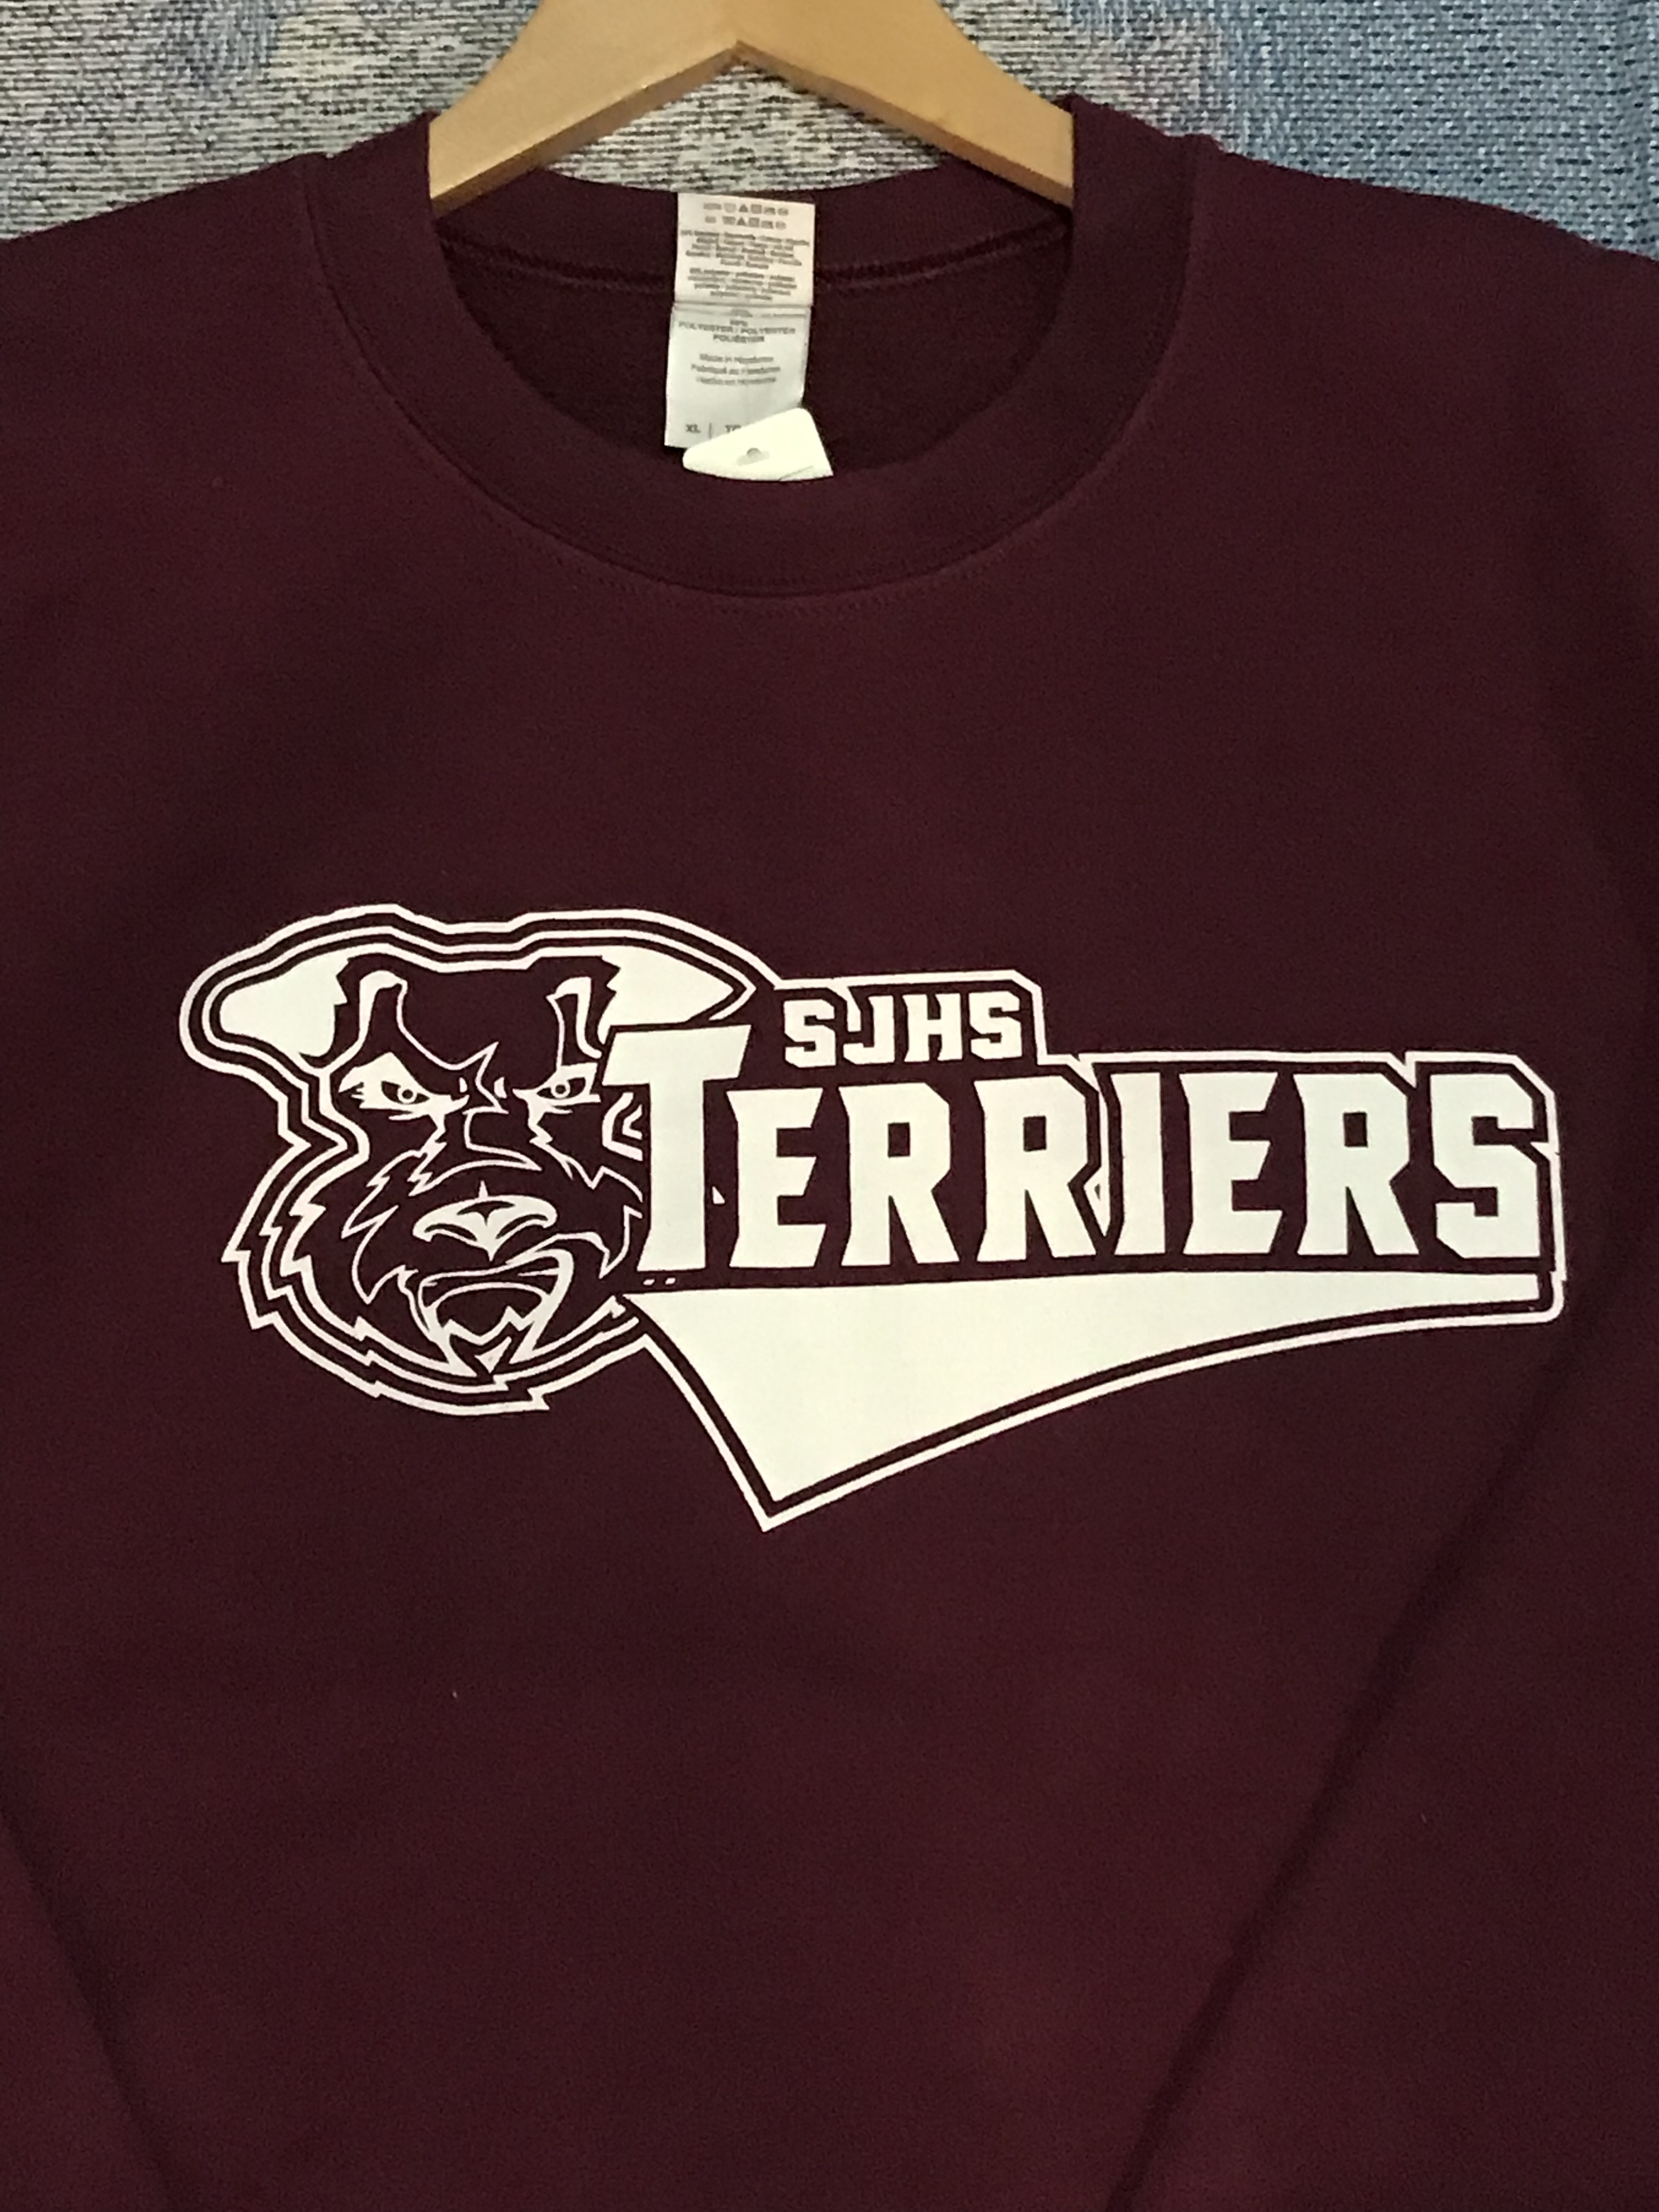 SJHS Terriers スウェット